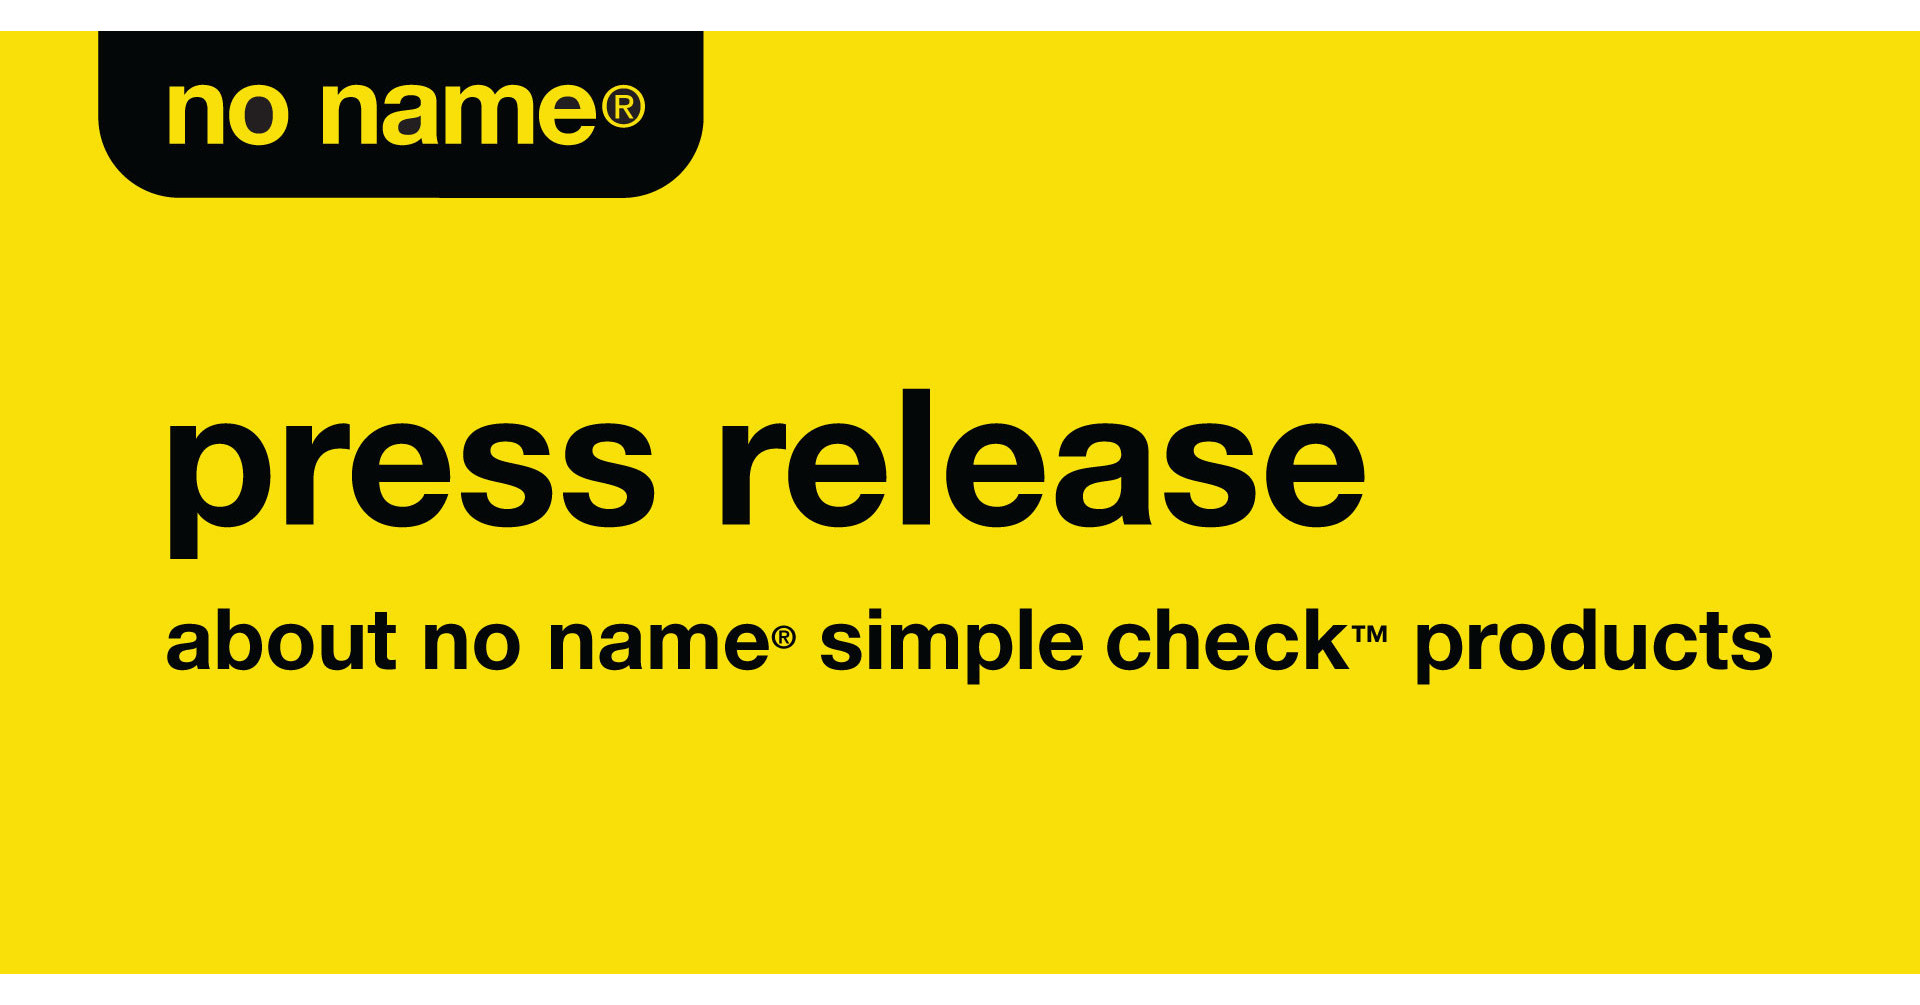 This is a press release about no name® Simple Check™ products